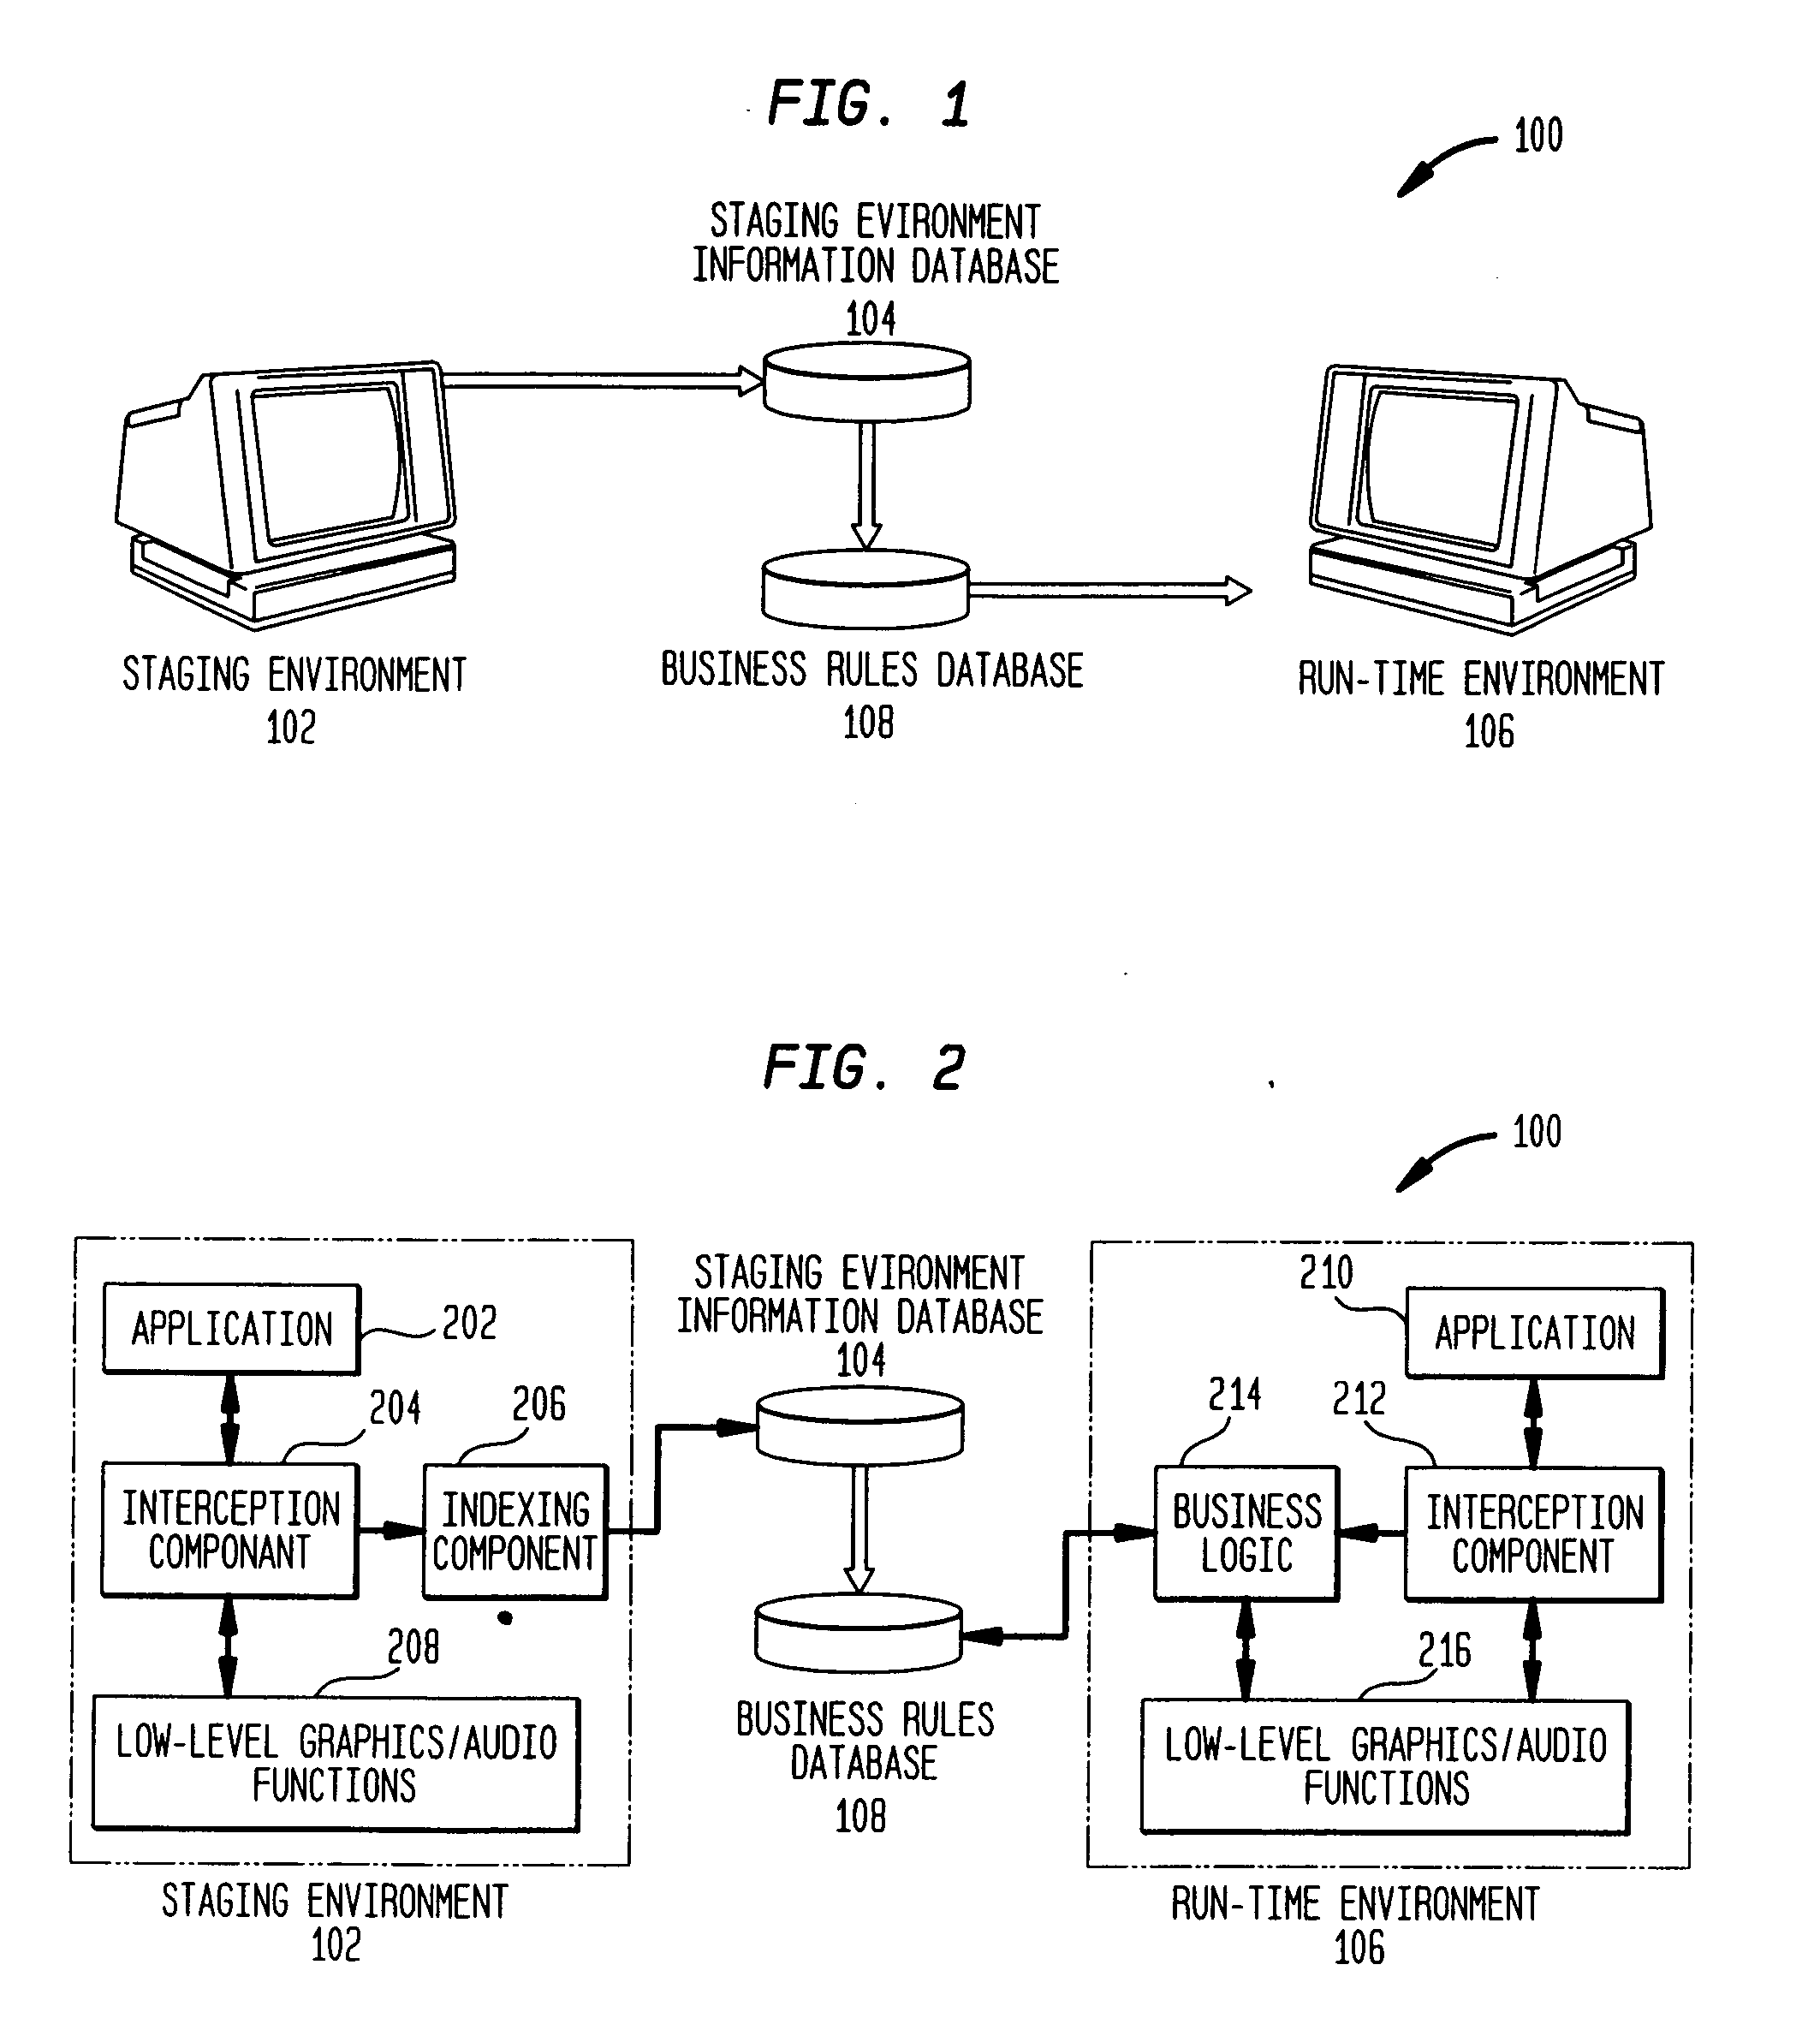 System, method and computer program product for dynamically serving advertisements in an executing computer game based on the entity having jurisdiction over the advertising space in the game